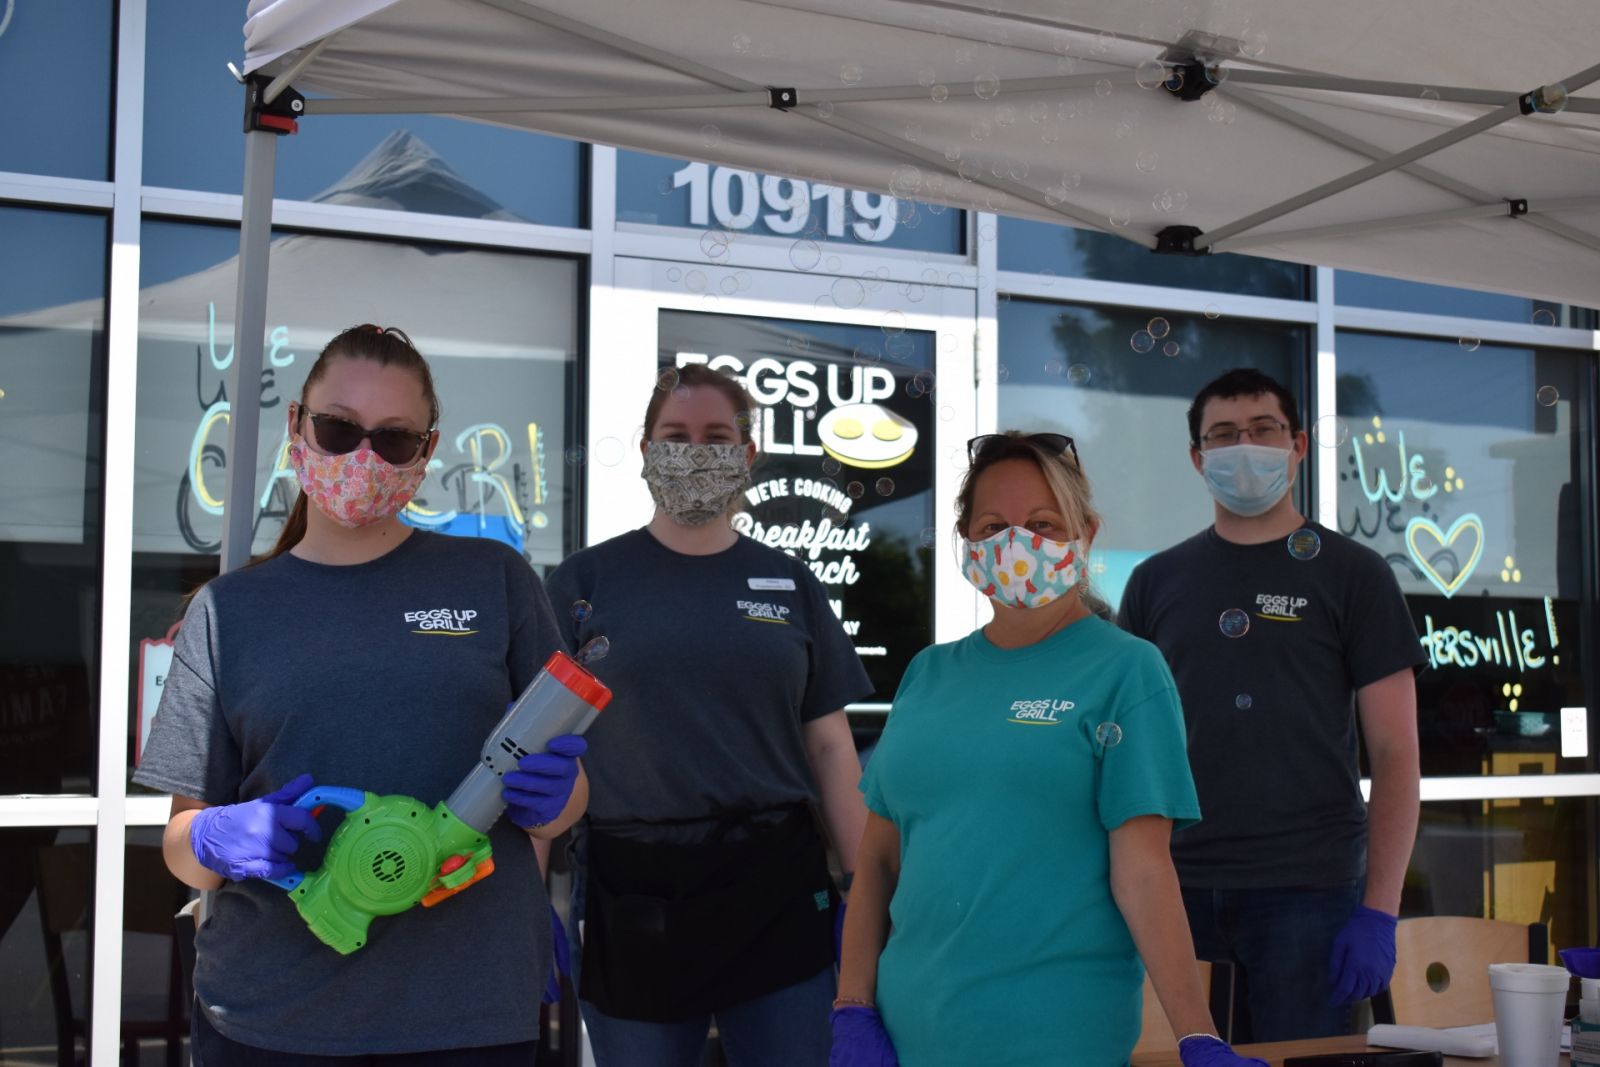 Eggs Up Grill's Powdersville team donned masks and loaded bubble guns to promote the restaurant's reopening in 2020. (Photo/Molly Hulsey)